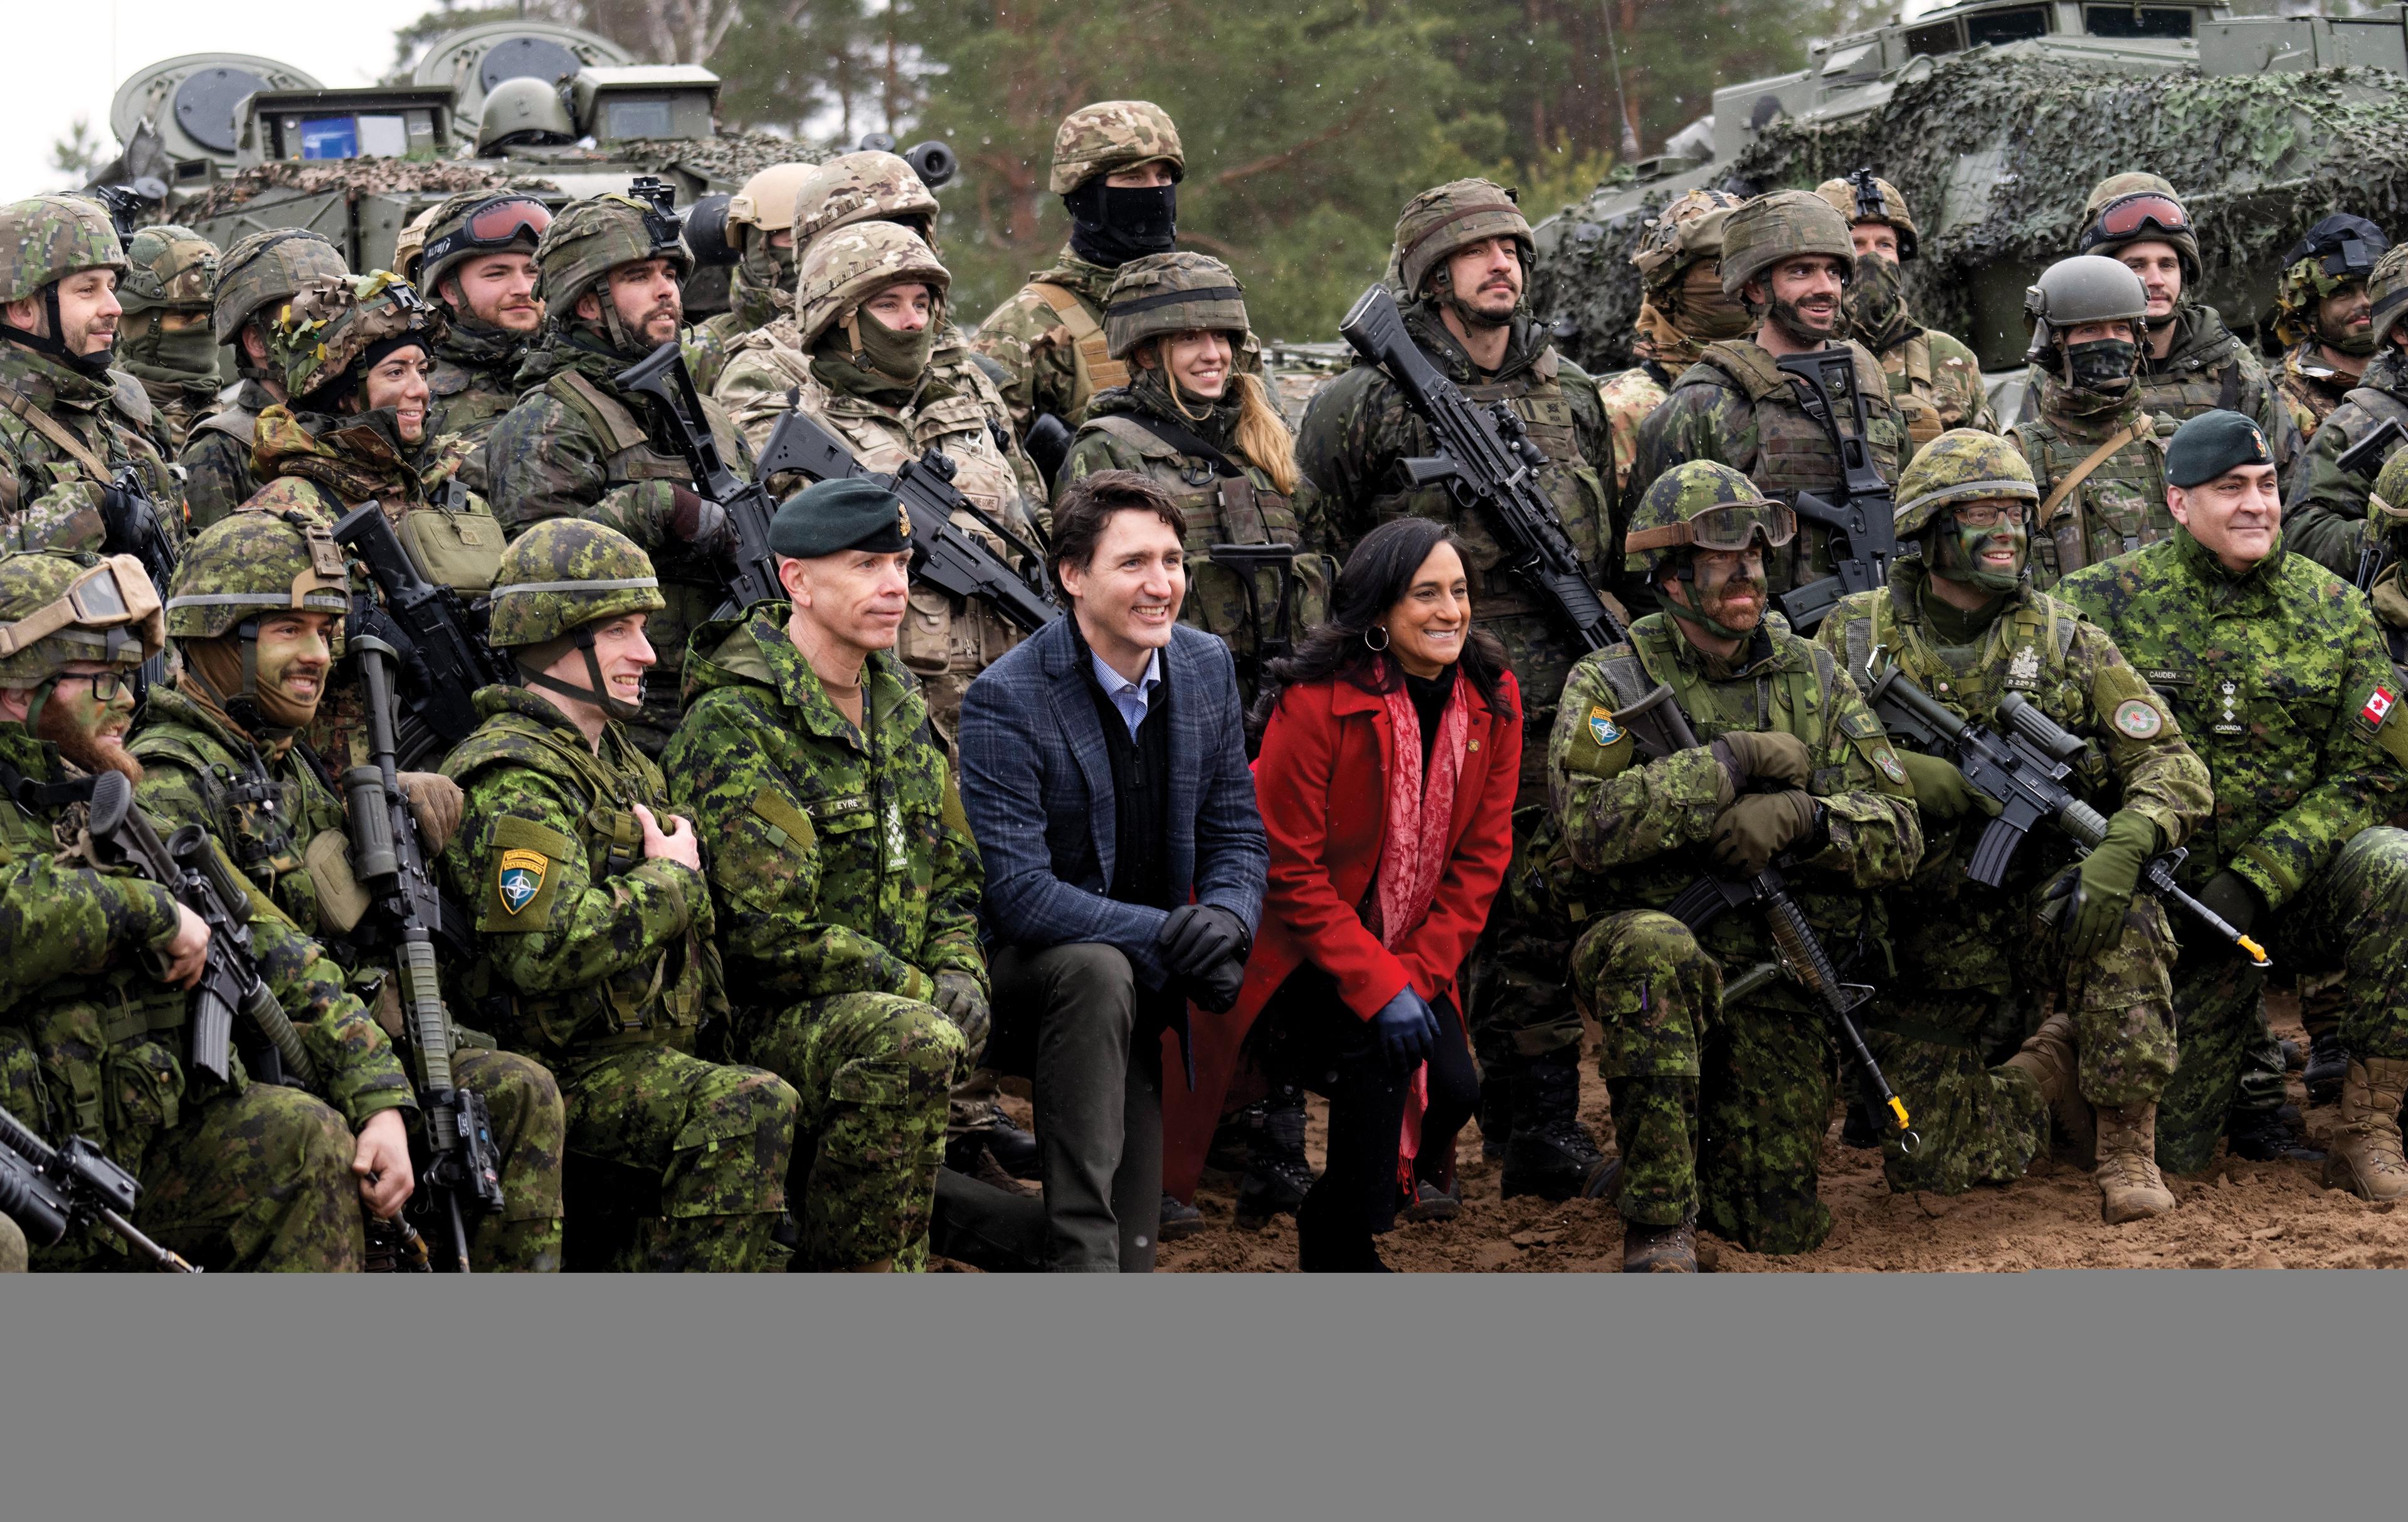 Anand has made an early impression within the military as a quick study who is willing to make difficult decisions without hesitation. (Adrian Wyld/The Canadian Press)